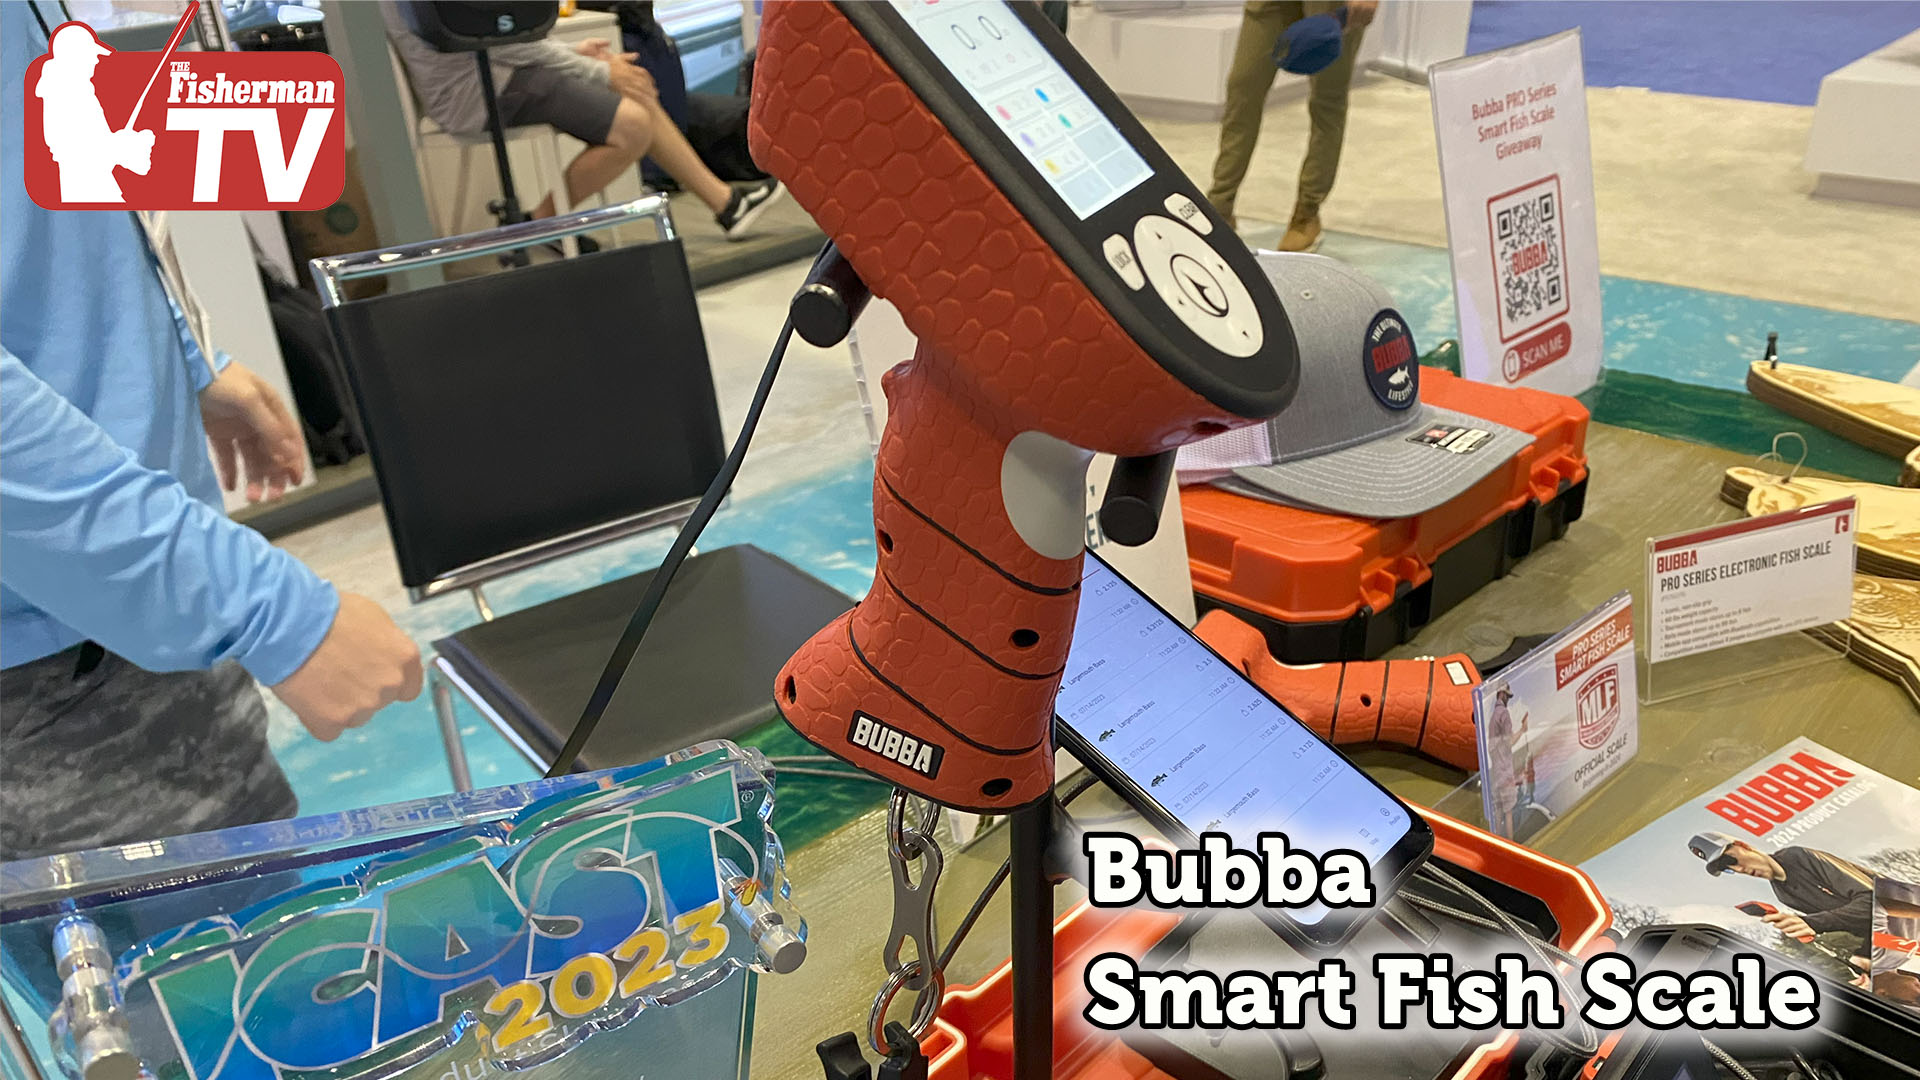 ICAST New Product Review- Bubba Pro Series Smart Fish Scale - The